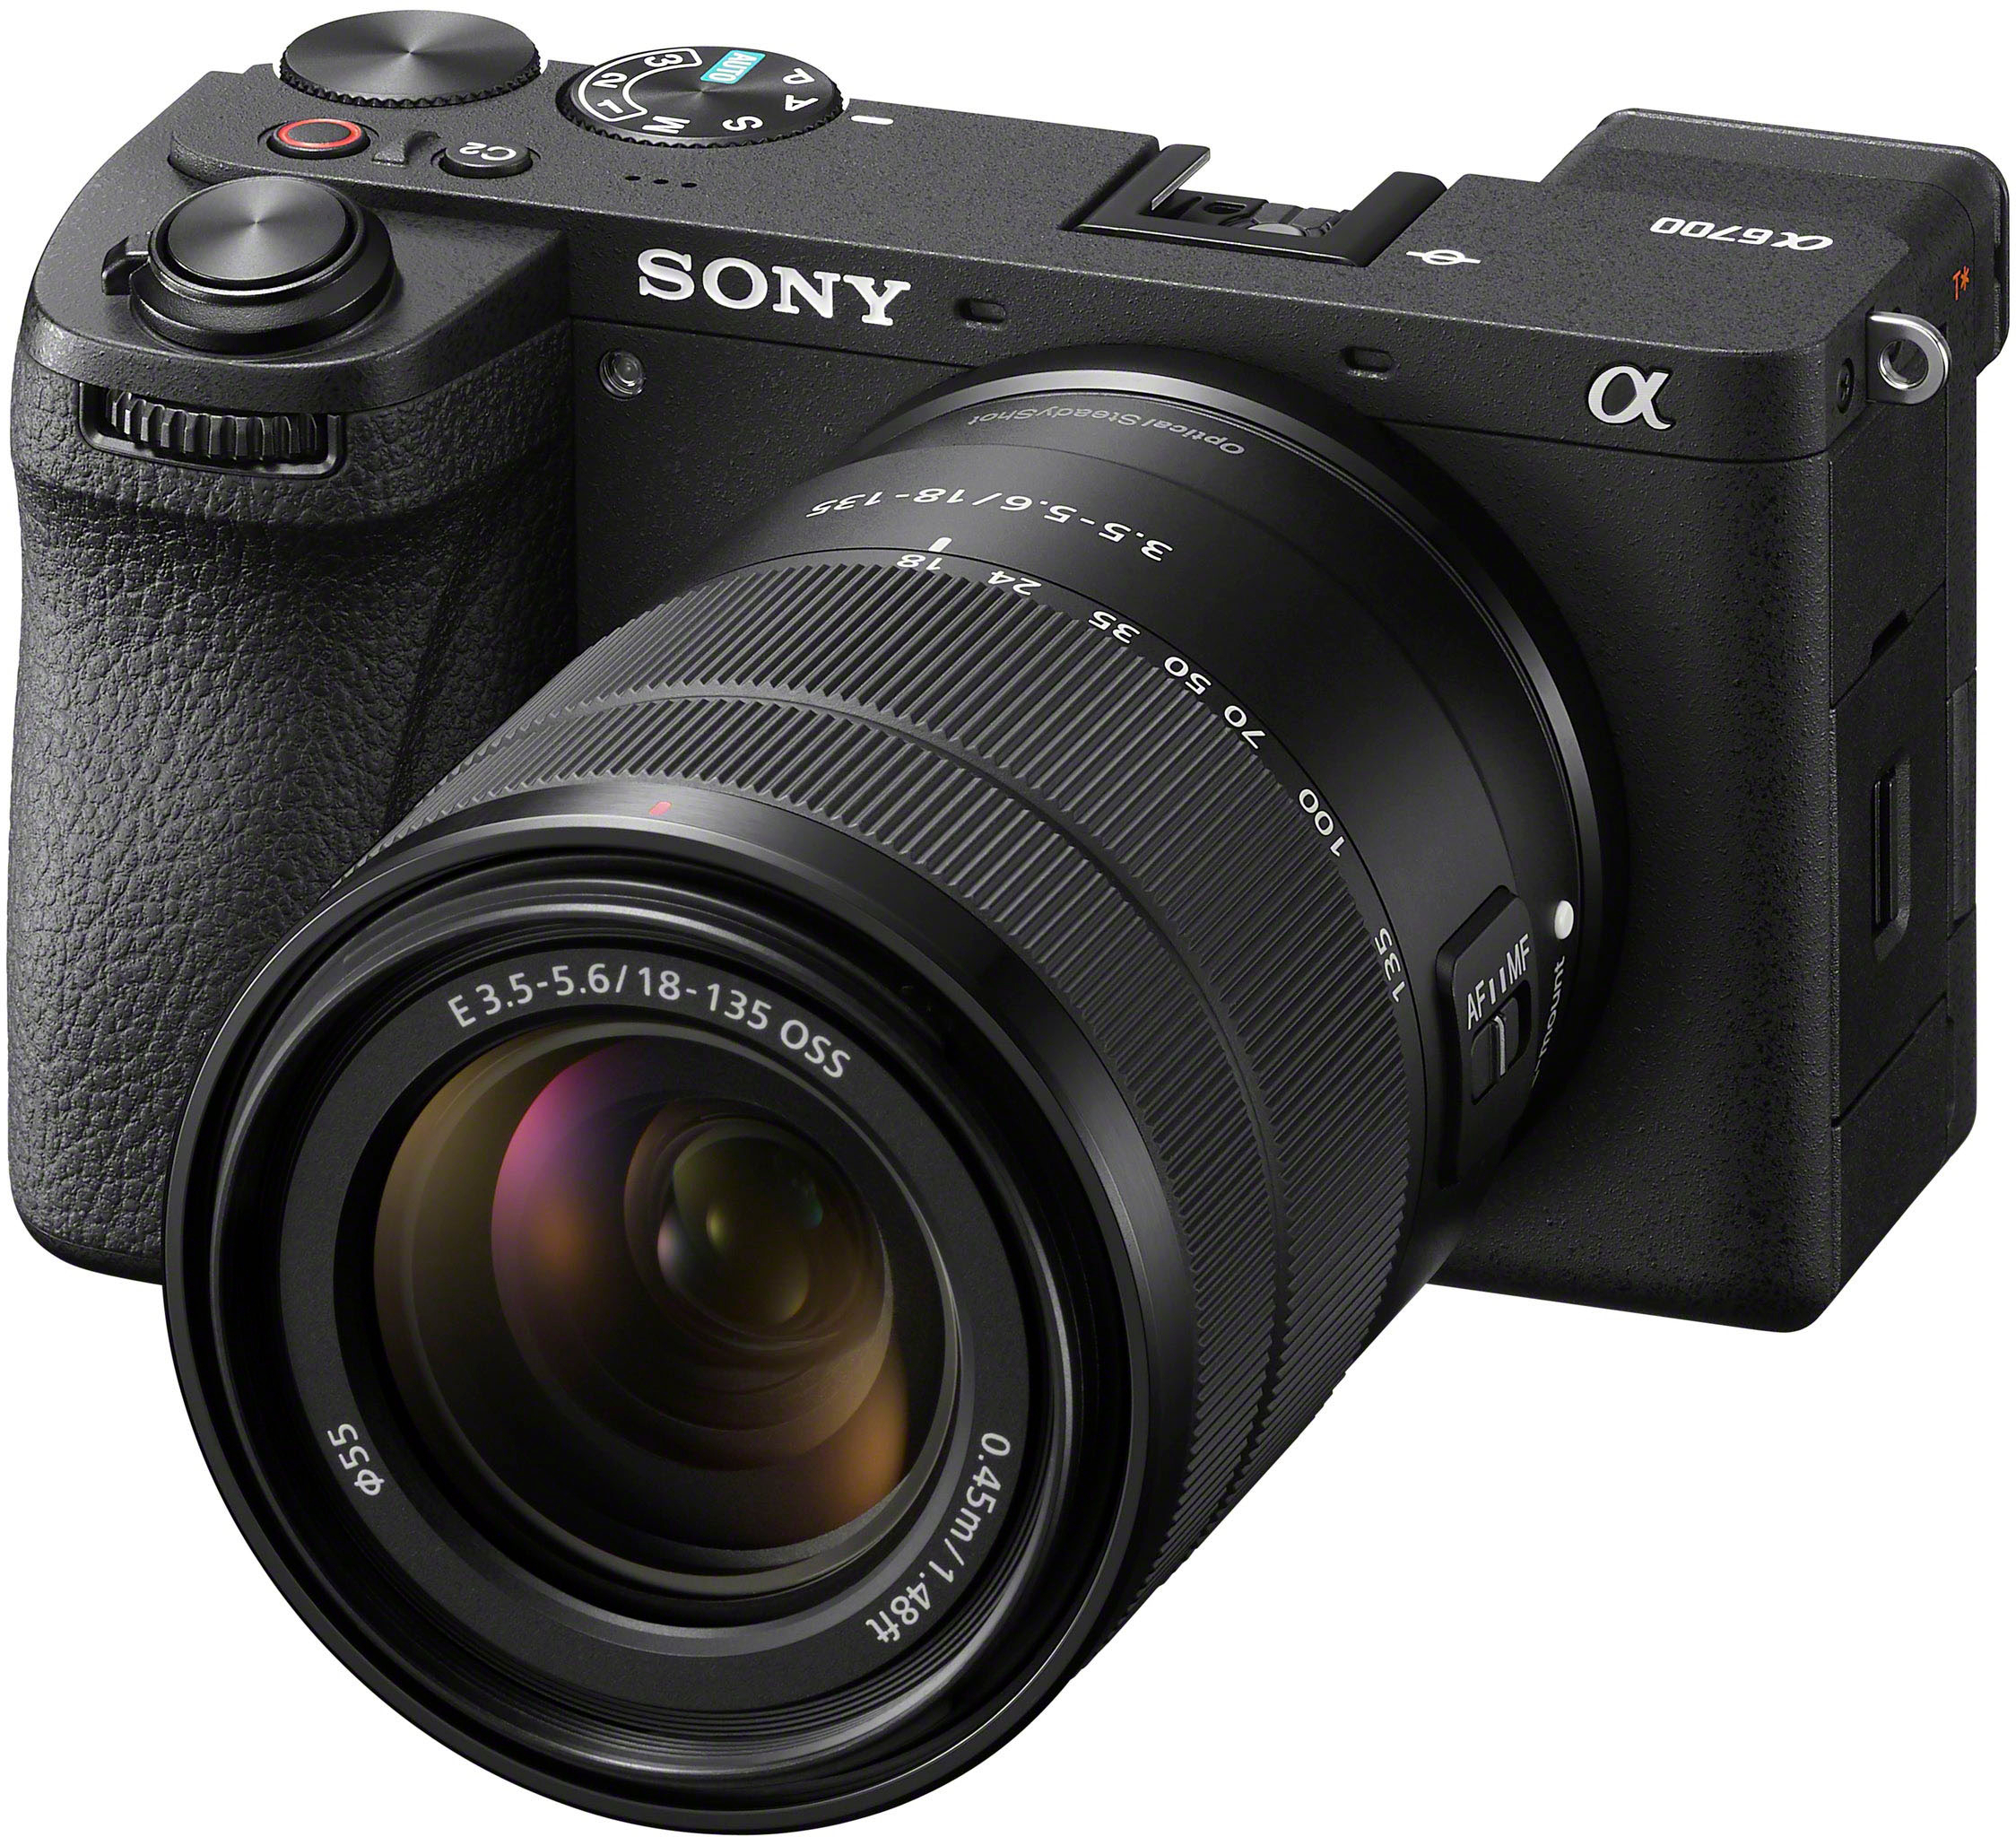 18-135 ILCE6700M/B Alpha Buy - Lens APS-C Best Camera 6700 Sony mm Mirrorless with E Black